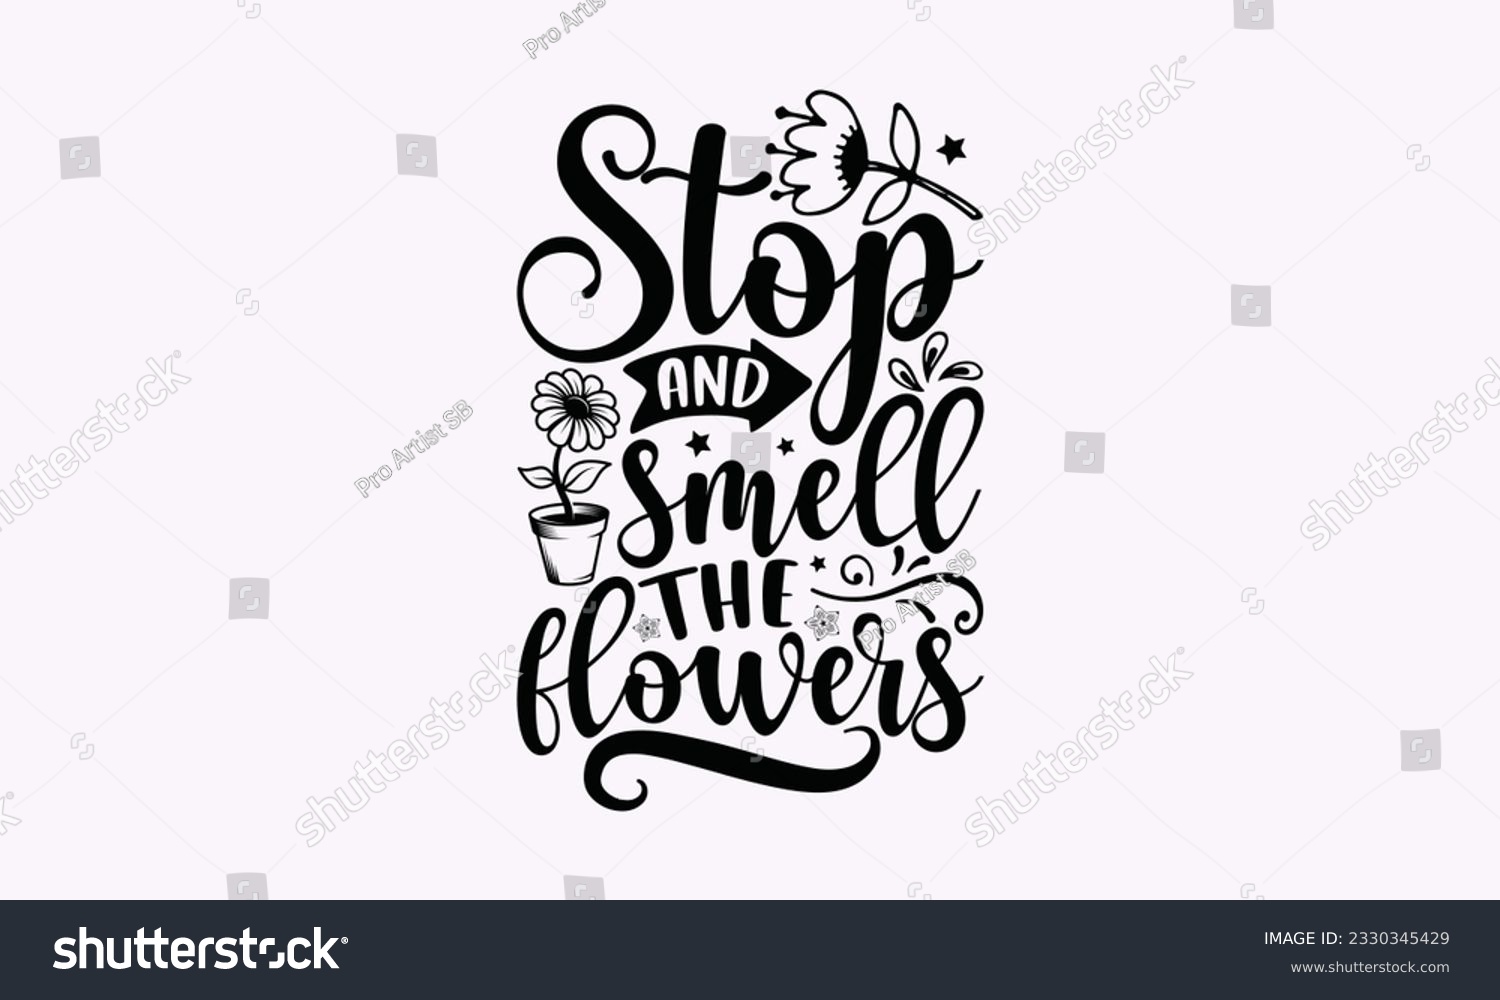 SVG of Stop the smell the flowers - Gardening SVG Design, Flower Quotes, Calligraphy graphic design, Typography poster with old style camera and quote. svg